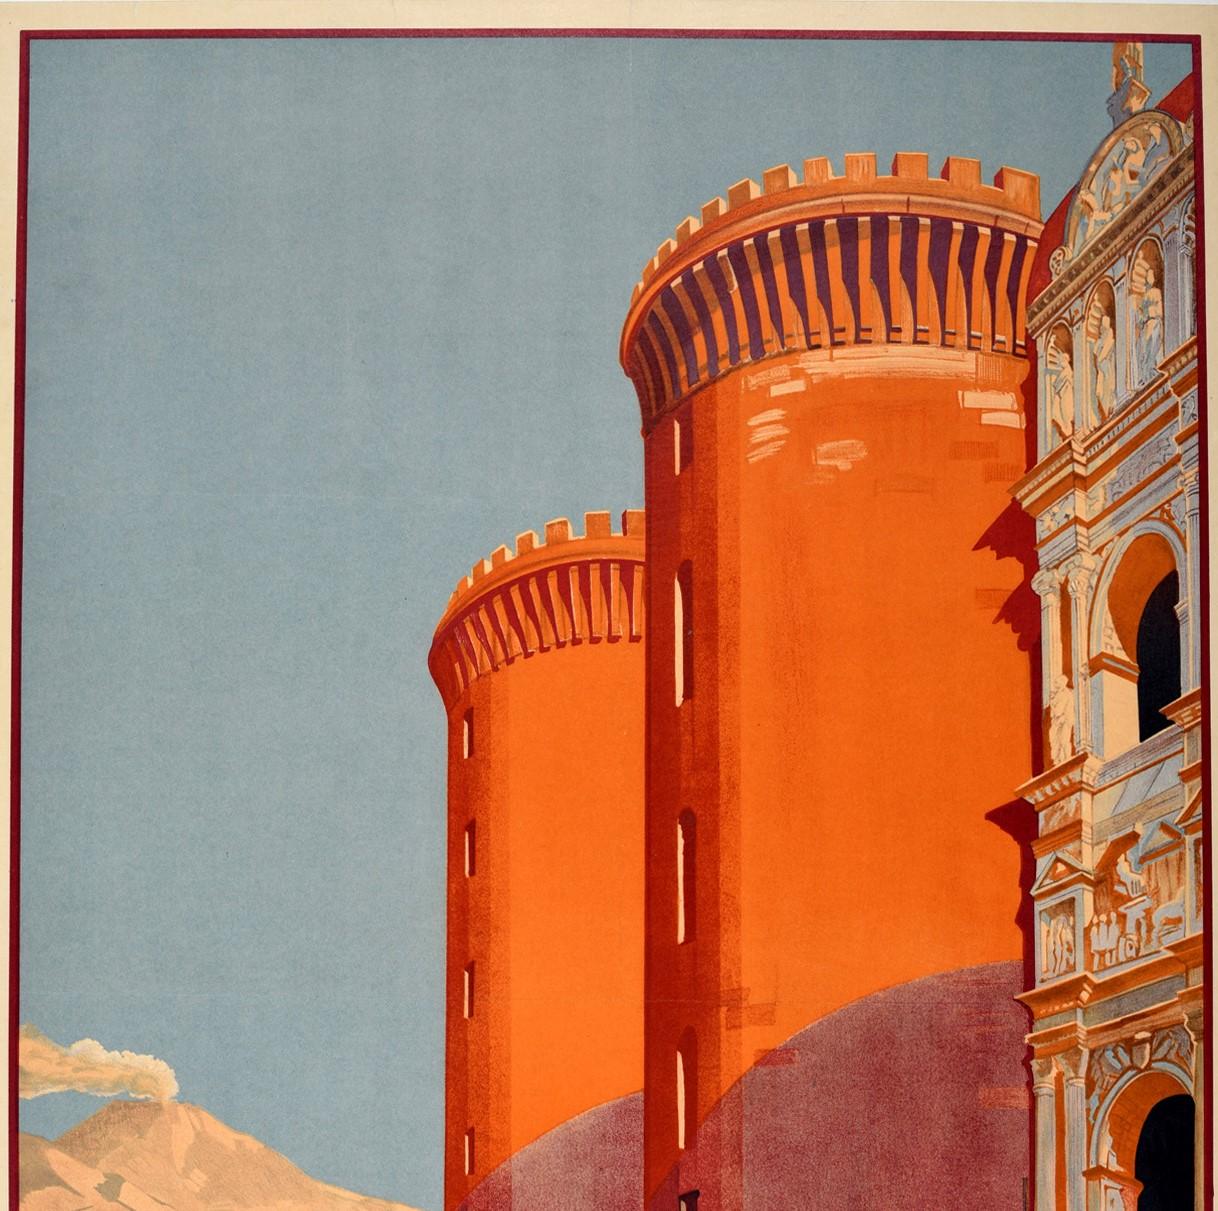 Original vintage ENIT travel poster for Napoli featuring a stunning design depicting the historic medieval Castel Nuovo / Maschio Angioino in Naples Campania Italy in the foreground with a scenic view over the harbour across the Bay of Naples